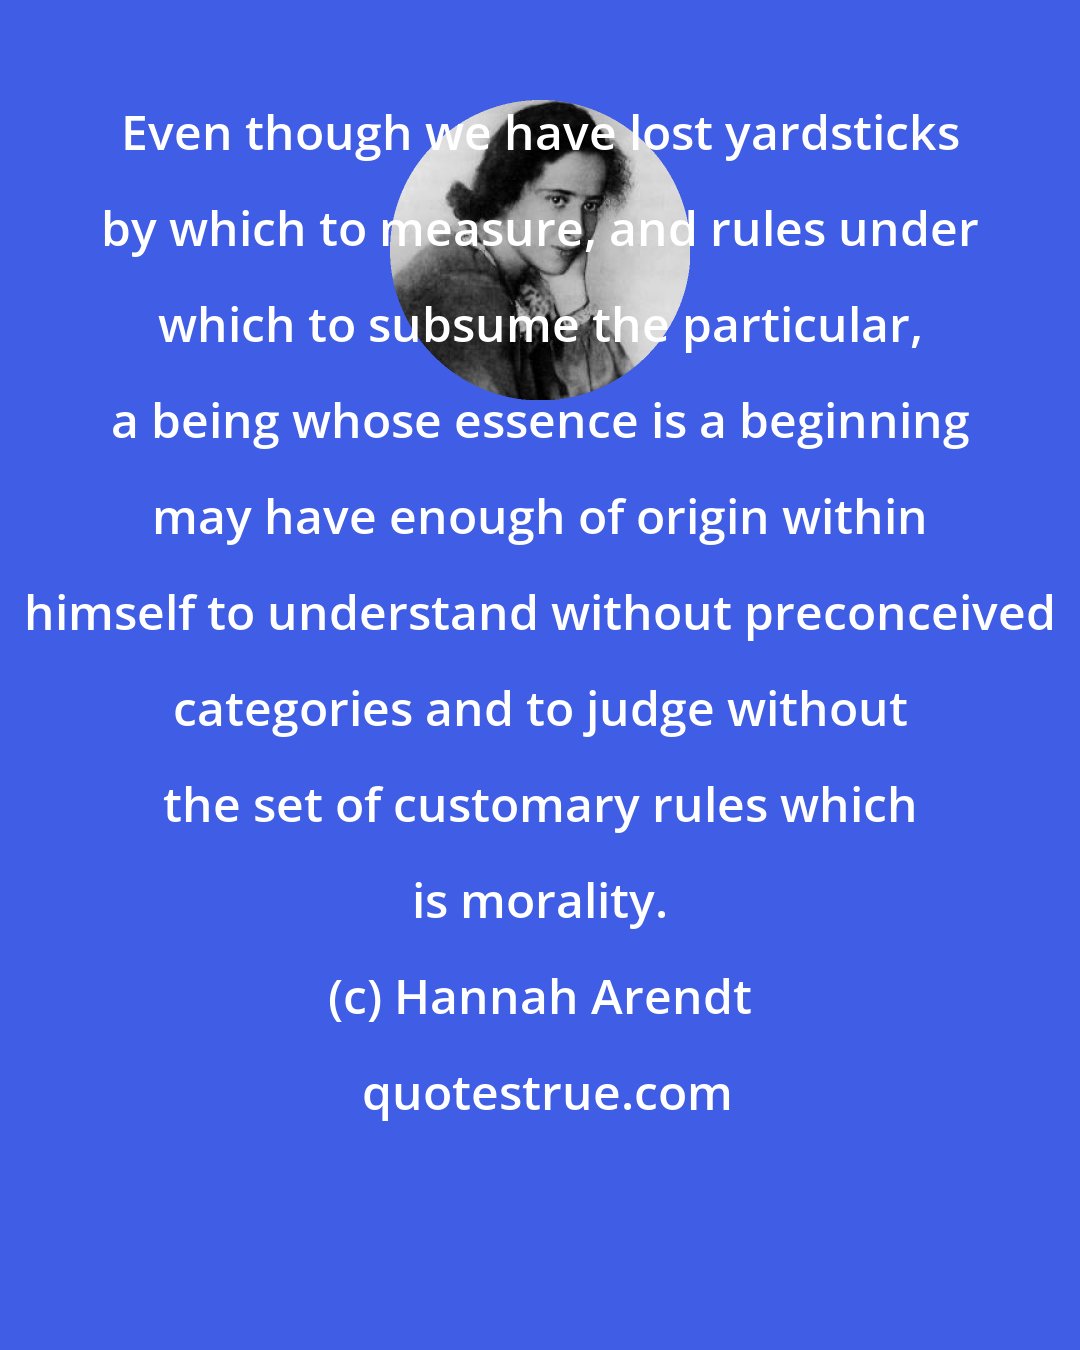 Hannah Arendt: Even though we have lost yardsticks by which to measure, and rules under which to subsume the particular, a being whose essence is a beginning may have enough of origin within himself to understand without preconceived categories and to judge without the set of customary rules which is morality.